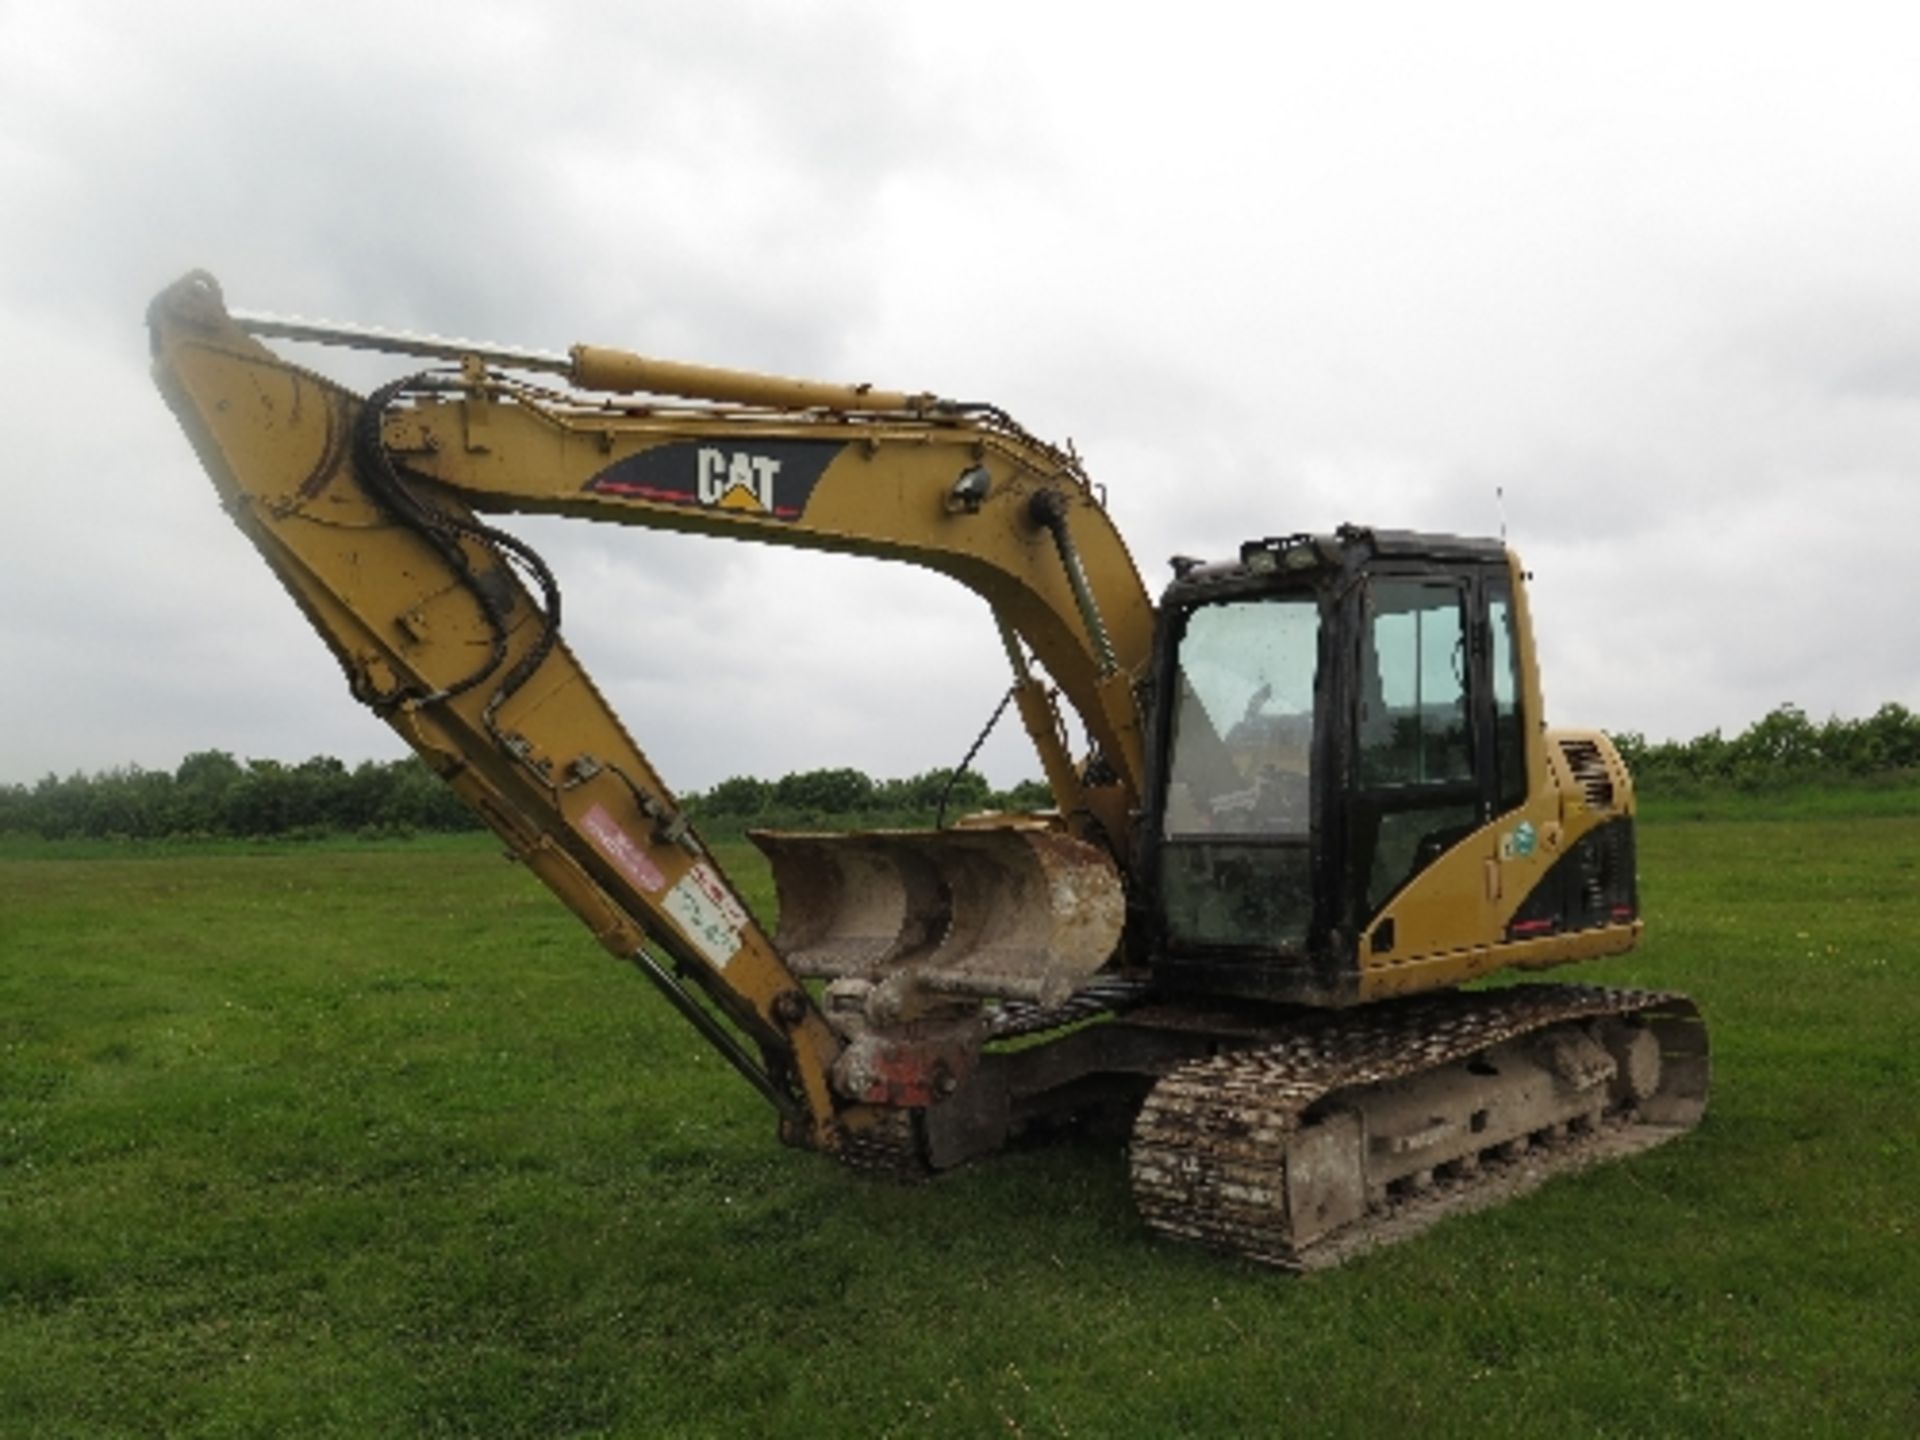 Caterpillar 311CU excavator 3331 hrs 2006 146383ALL LOTS are SOLD AS SEEN WITHOUT WARRANTY